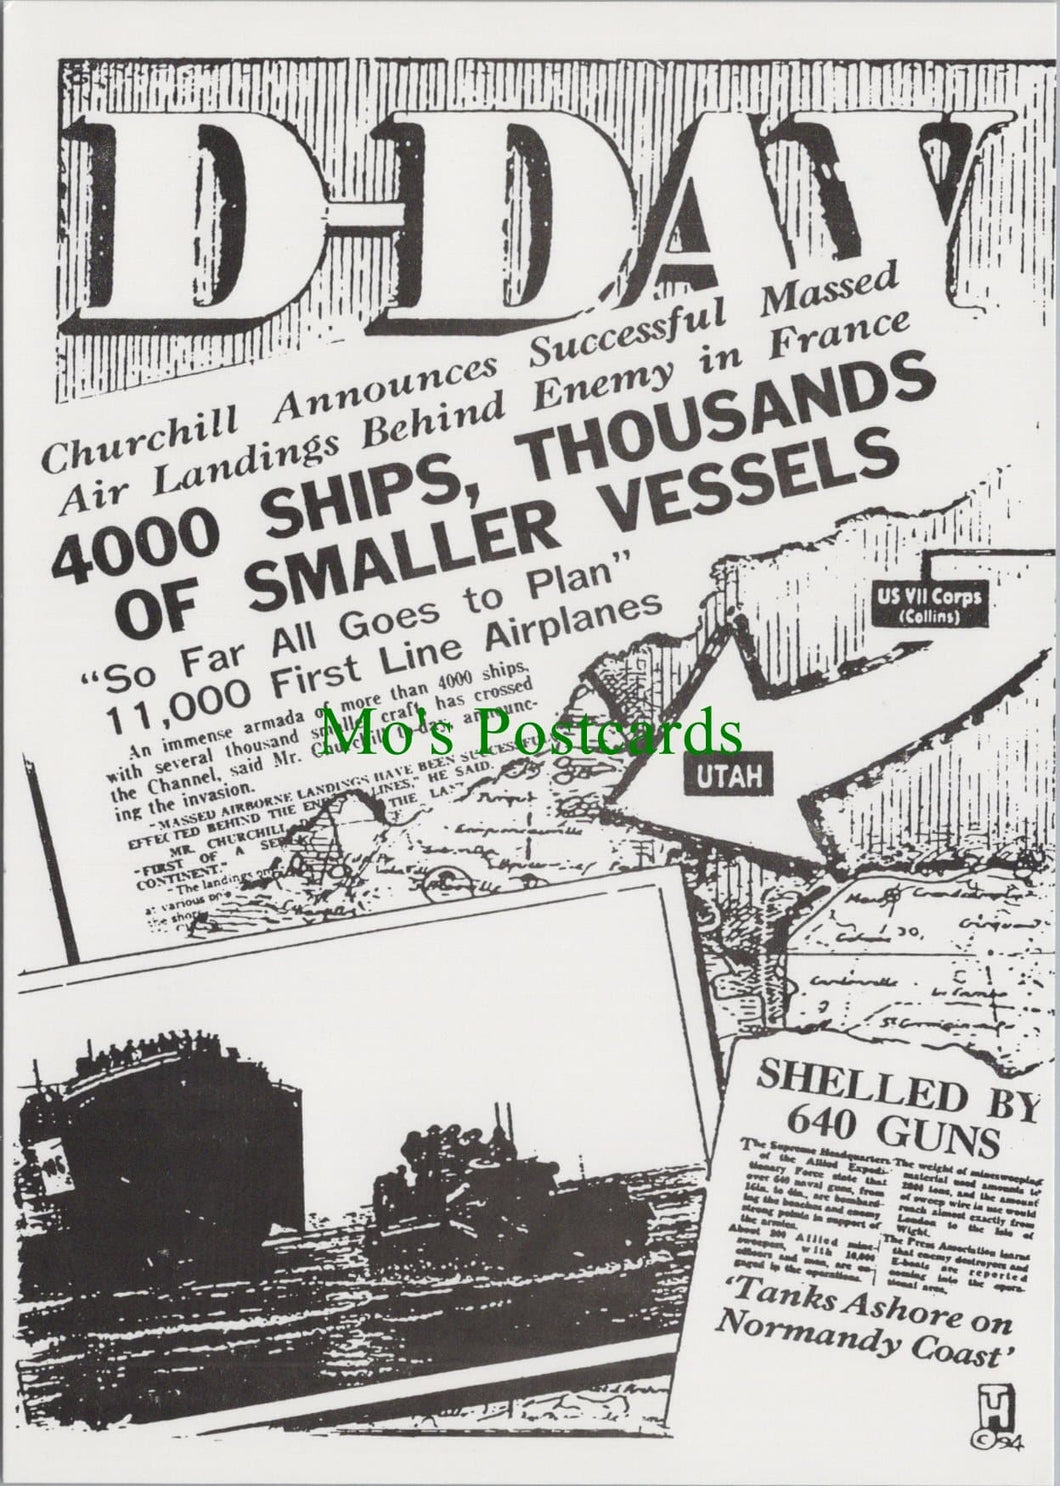 Military Postcard - 50th Anniversary of D-Day